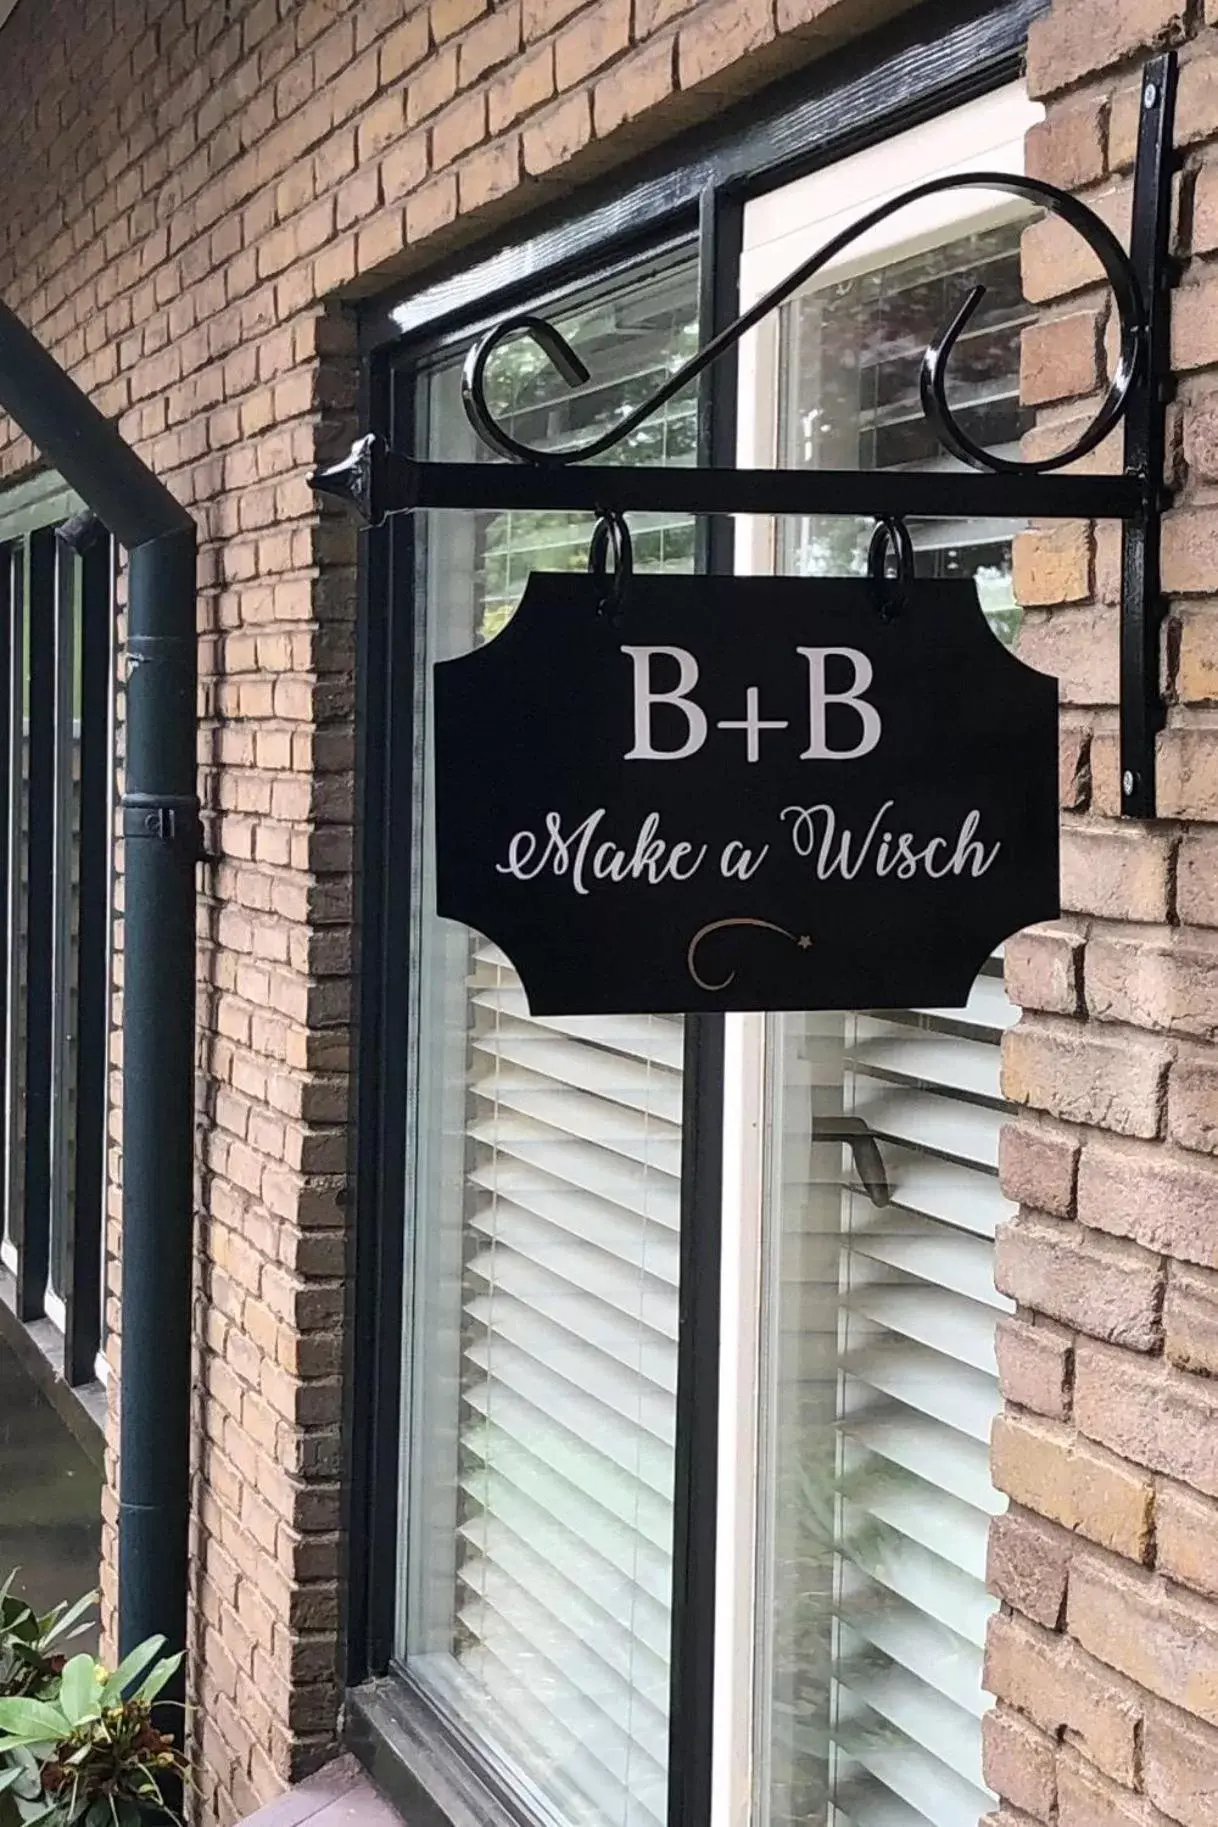 Property logo or sign in B&B - Make a Wisch